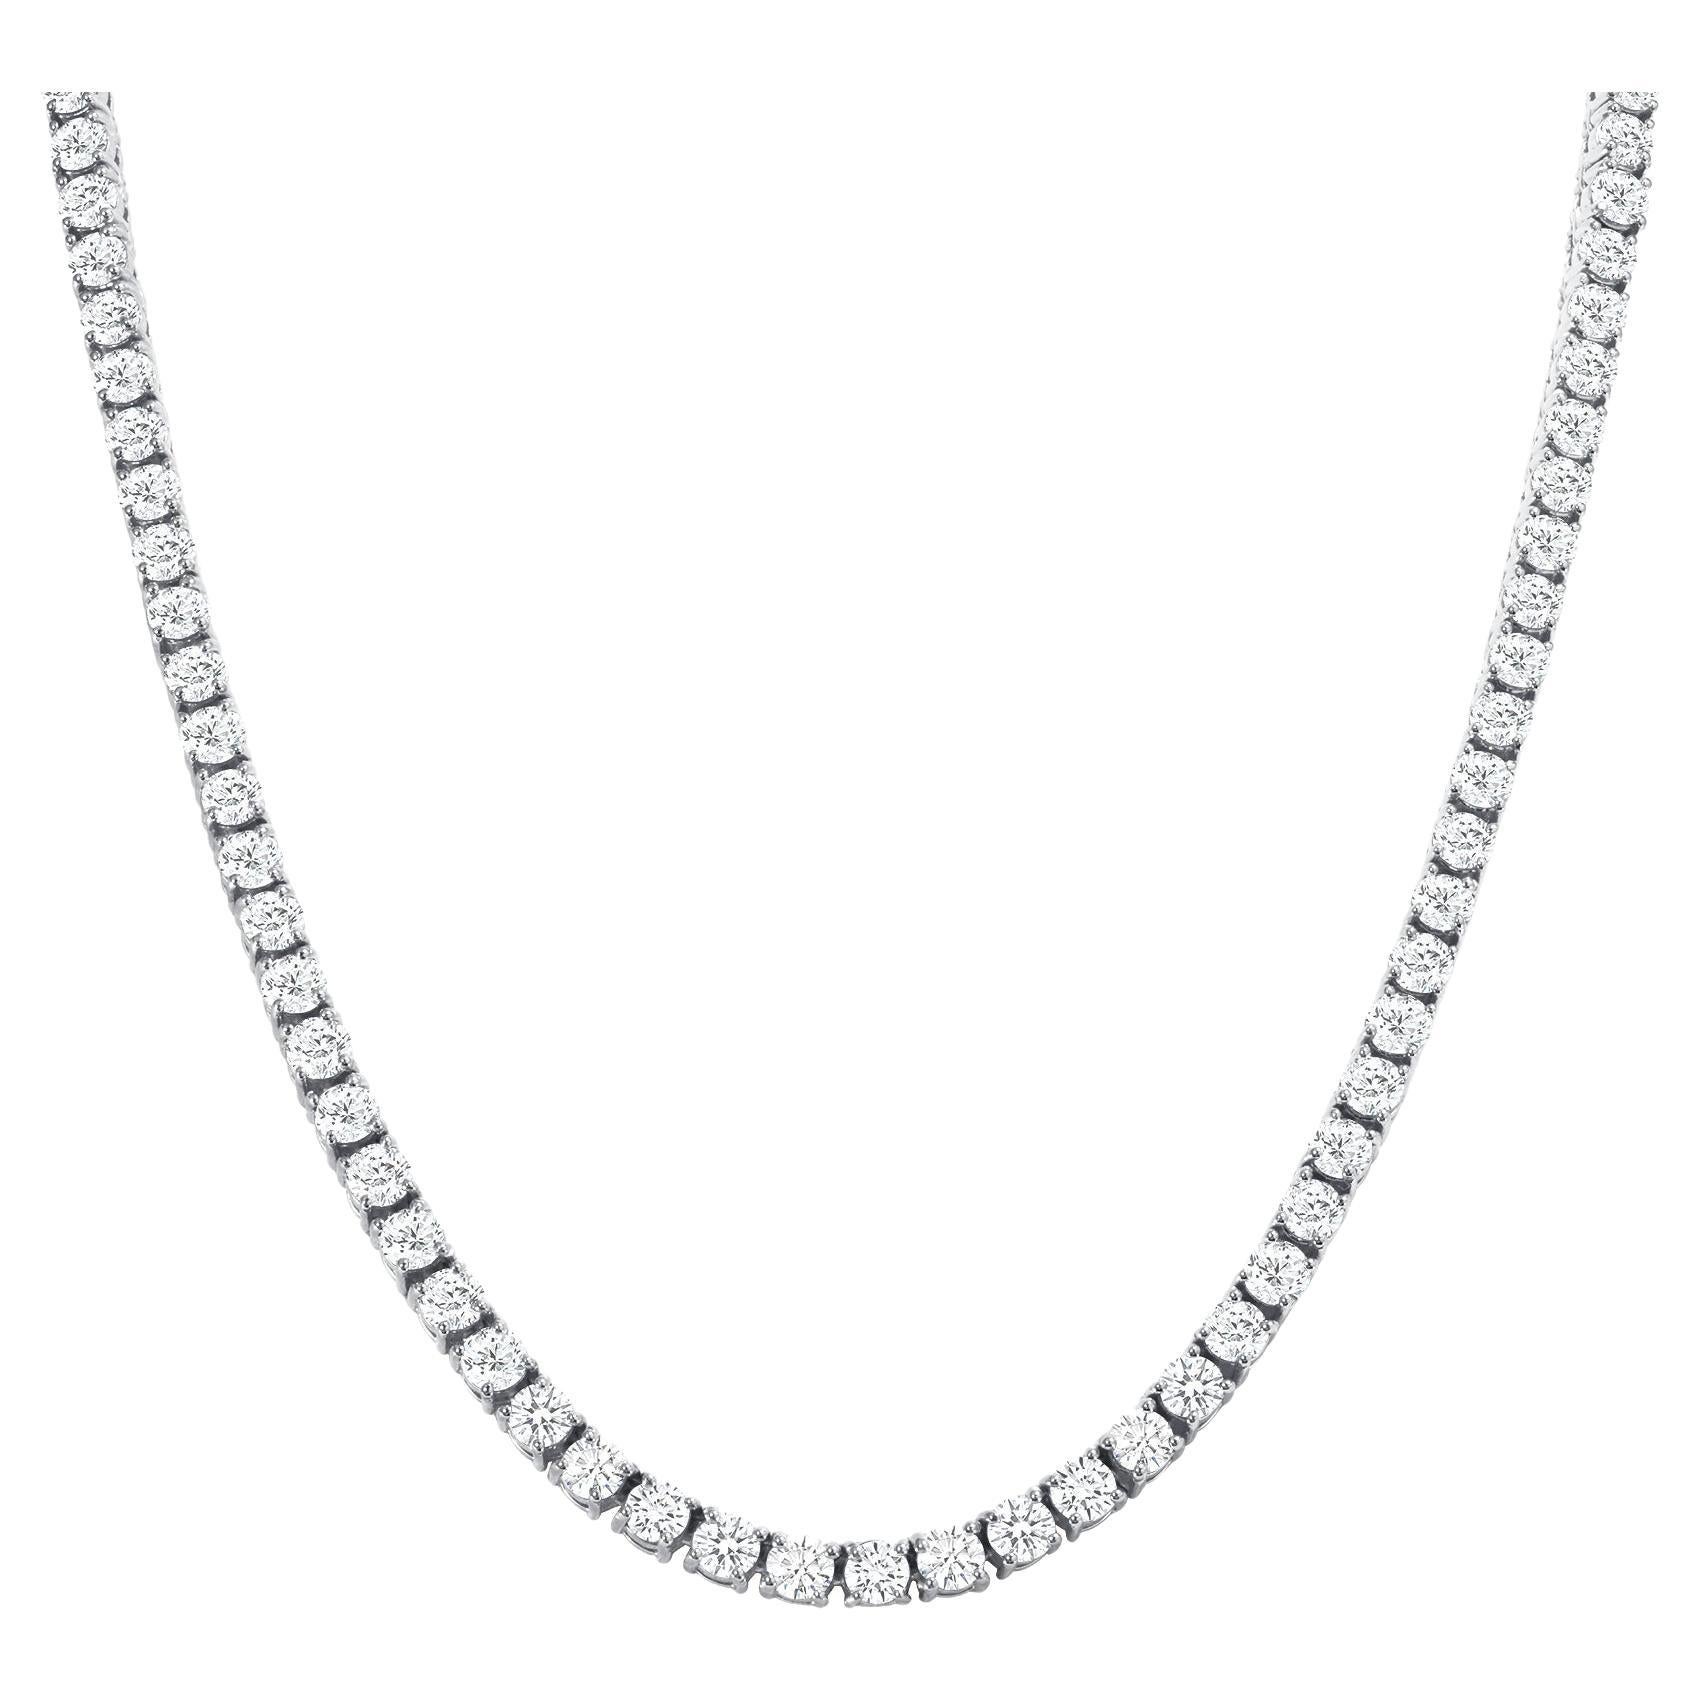 Buy Ross-Simons 3.00 ct. t.w. Diamond Tennis Necklace in 18kt Gold Over  Sterling For Women 16-20 Inch at Amazon.in